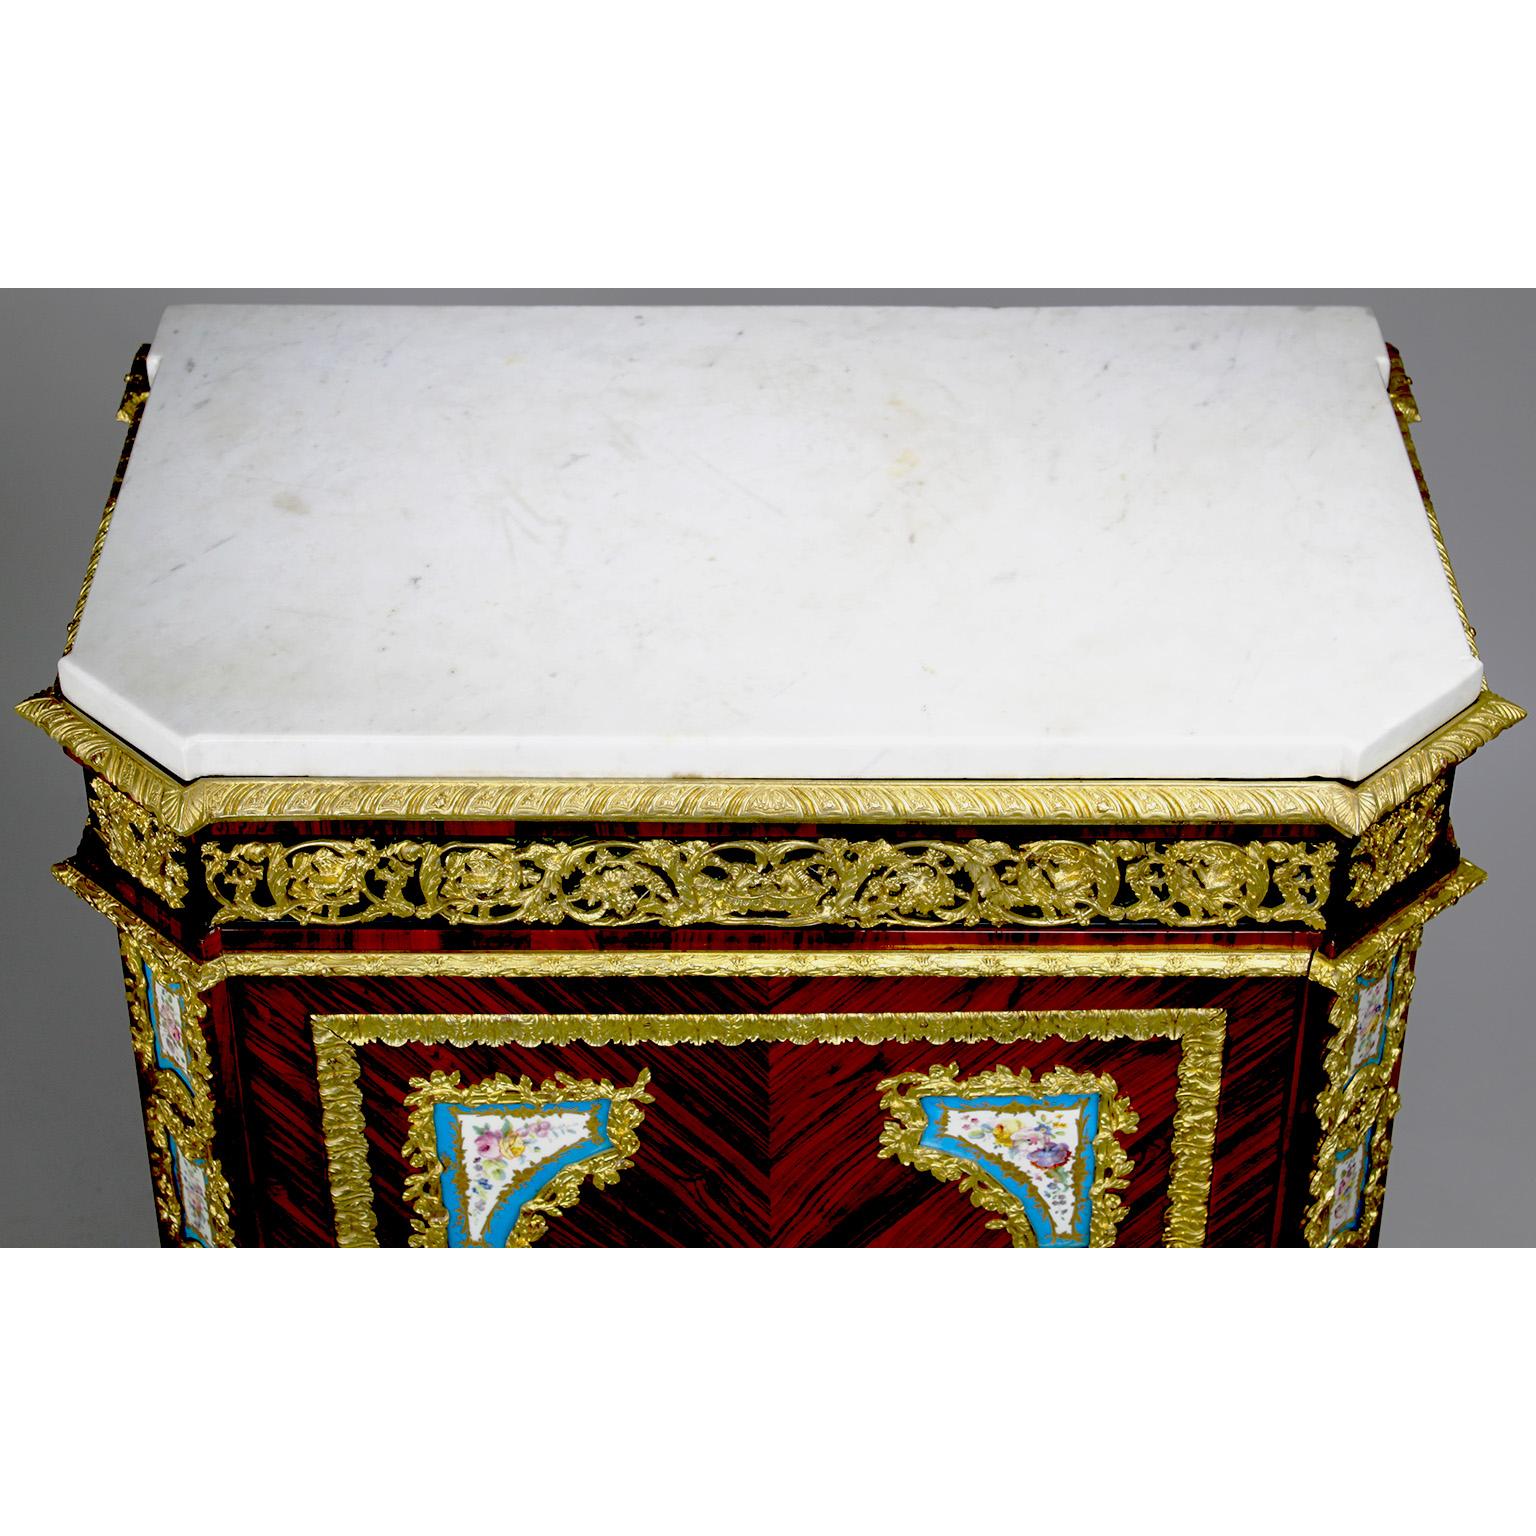 French Napoleon III Ormolu & Porcelain Mounted Cabinet Meuble D'Appui by Befort For Sale 2